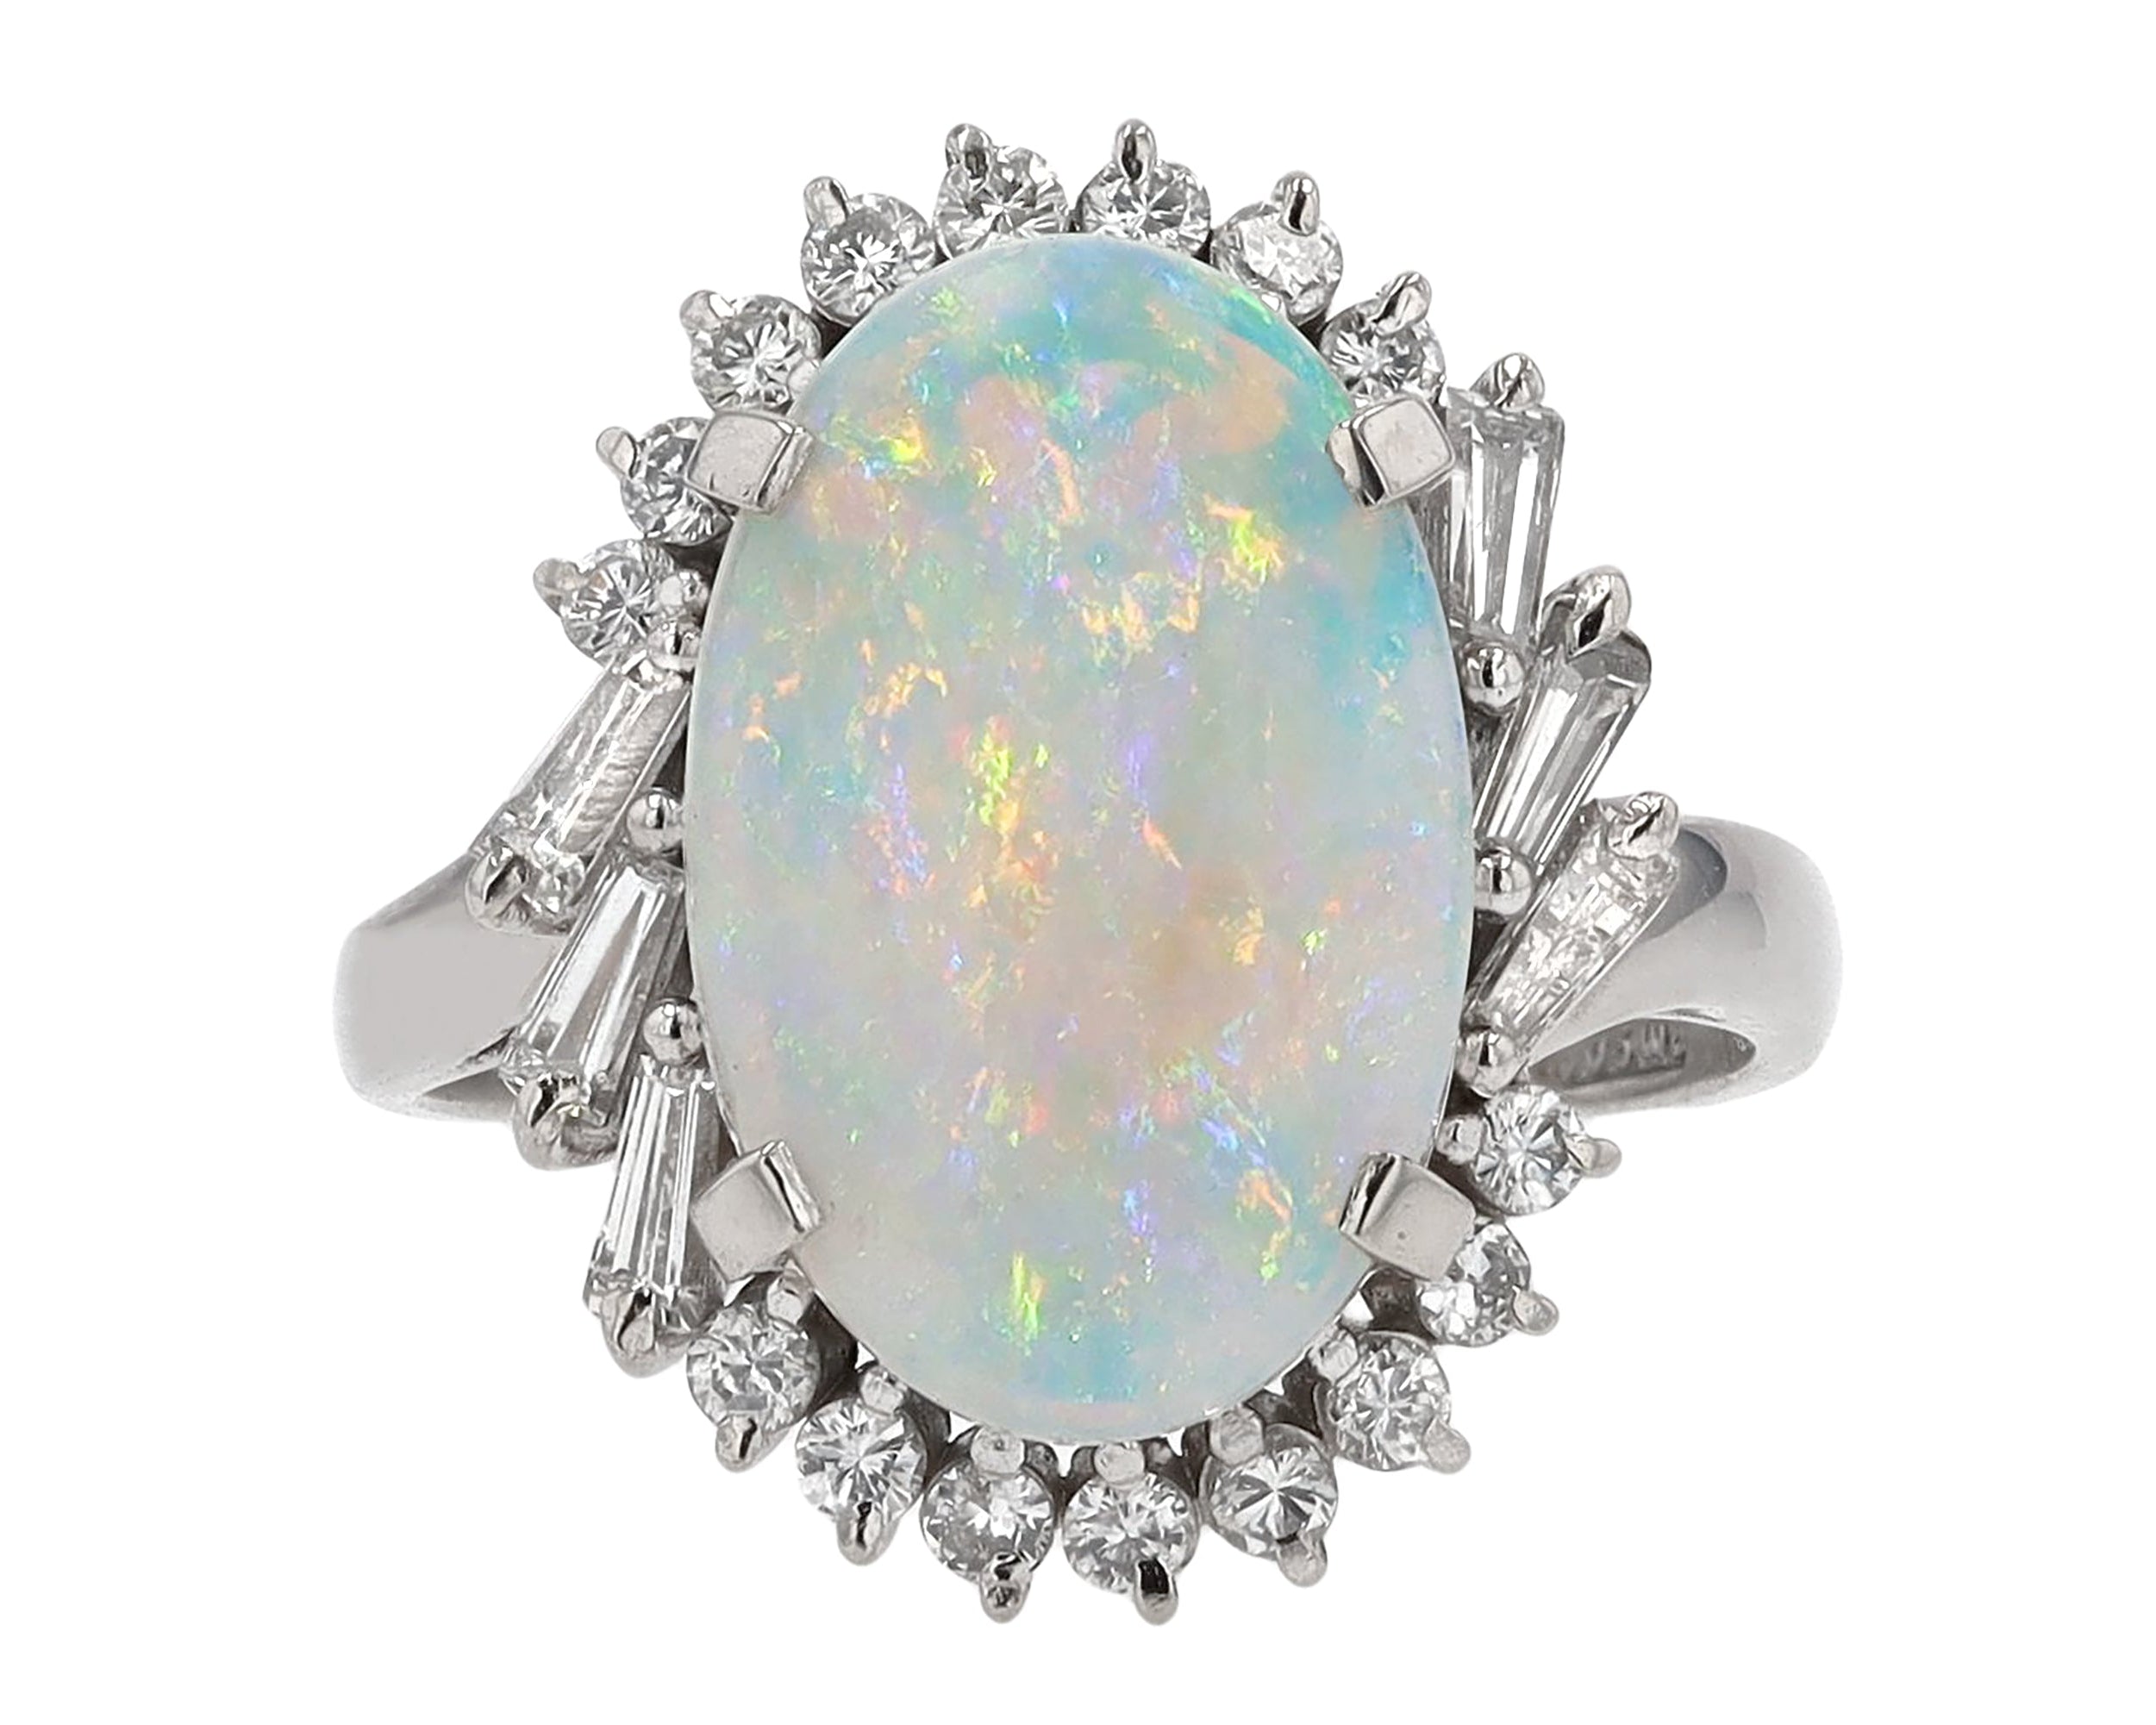 Large Opal Cocktail Ring